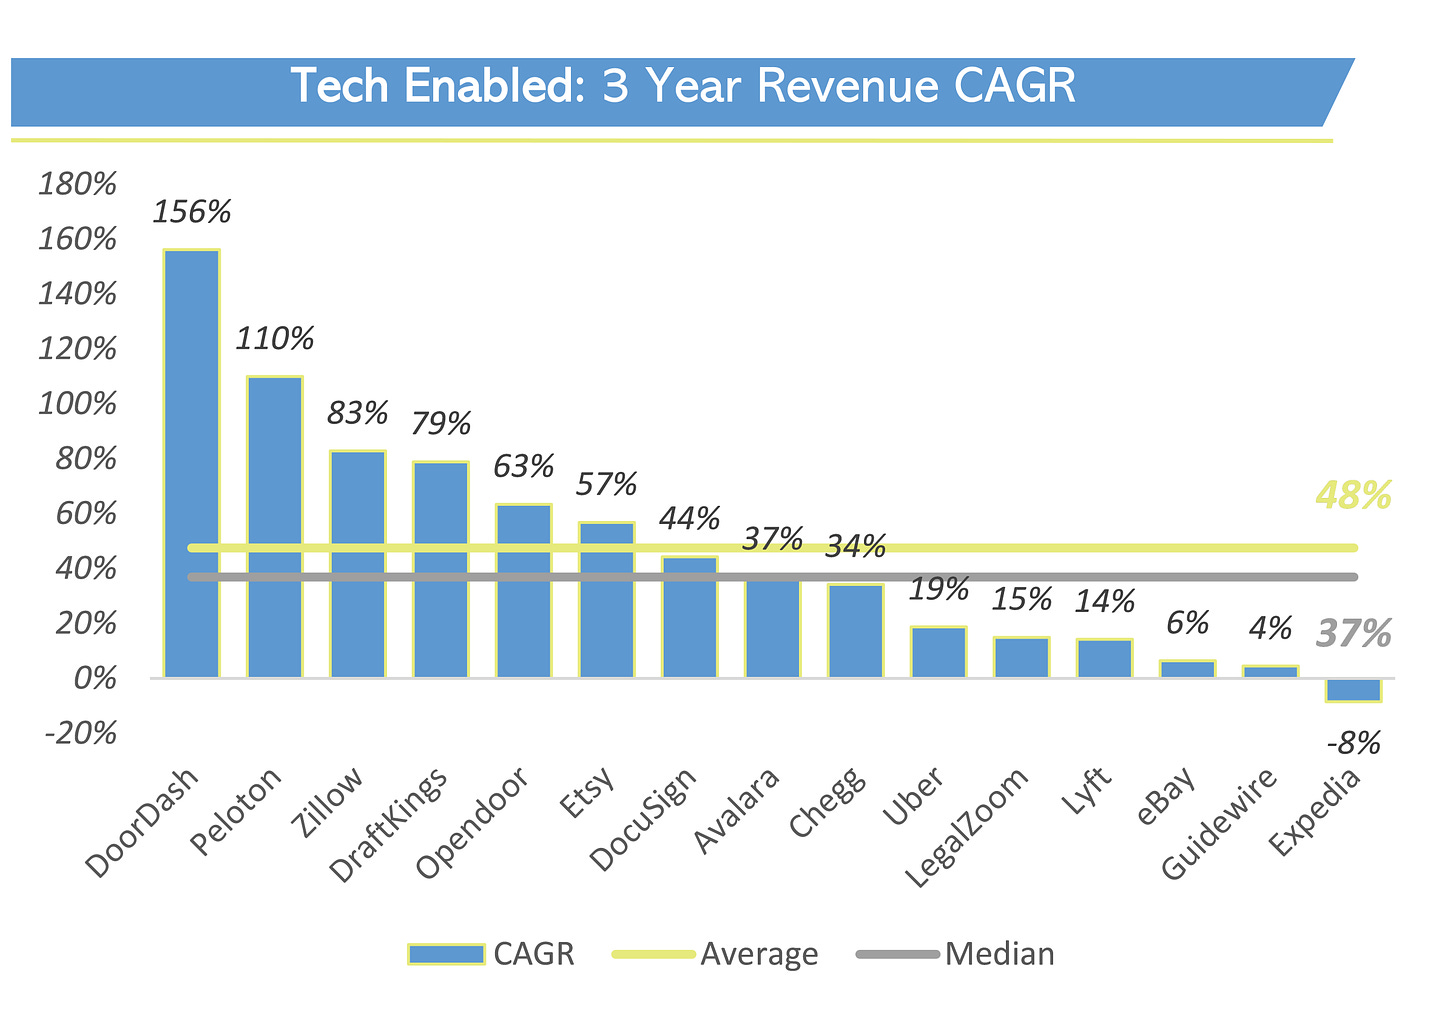 Tech enabled CAGR